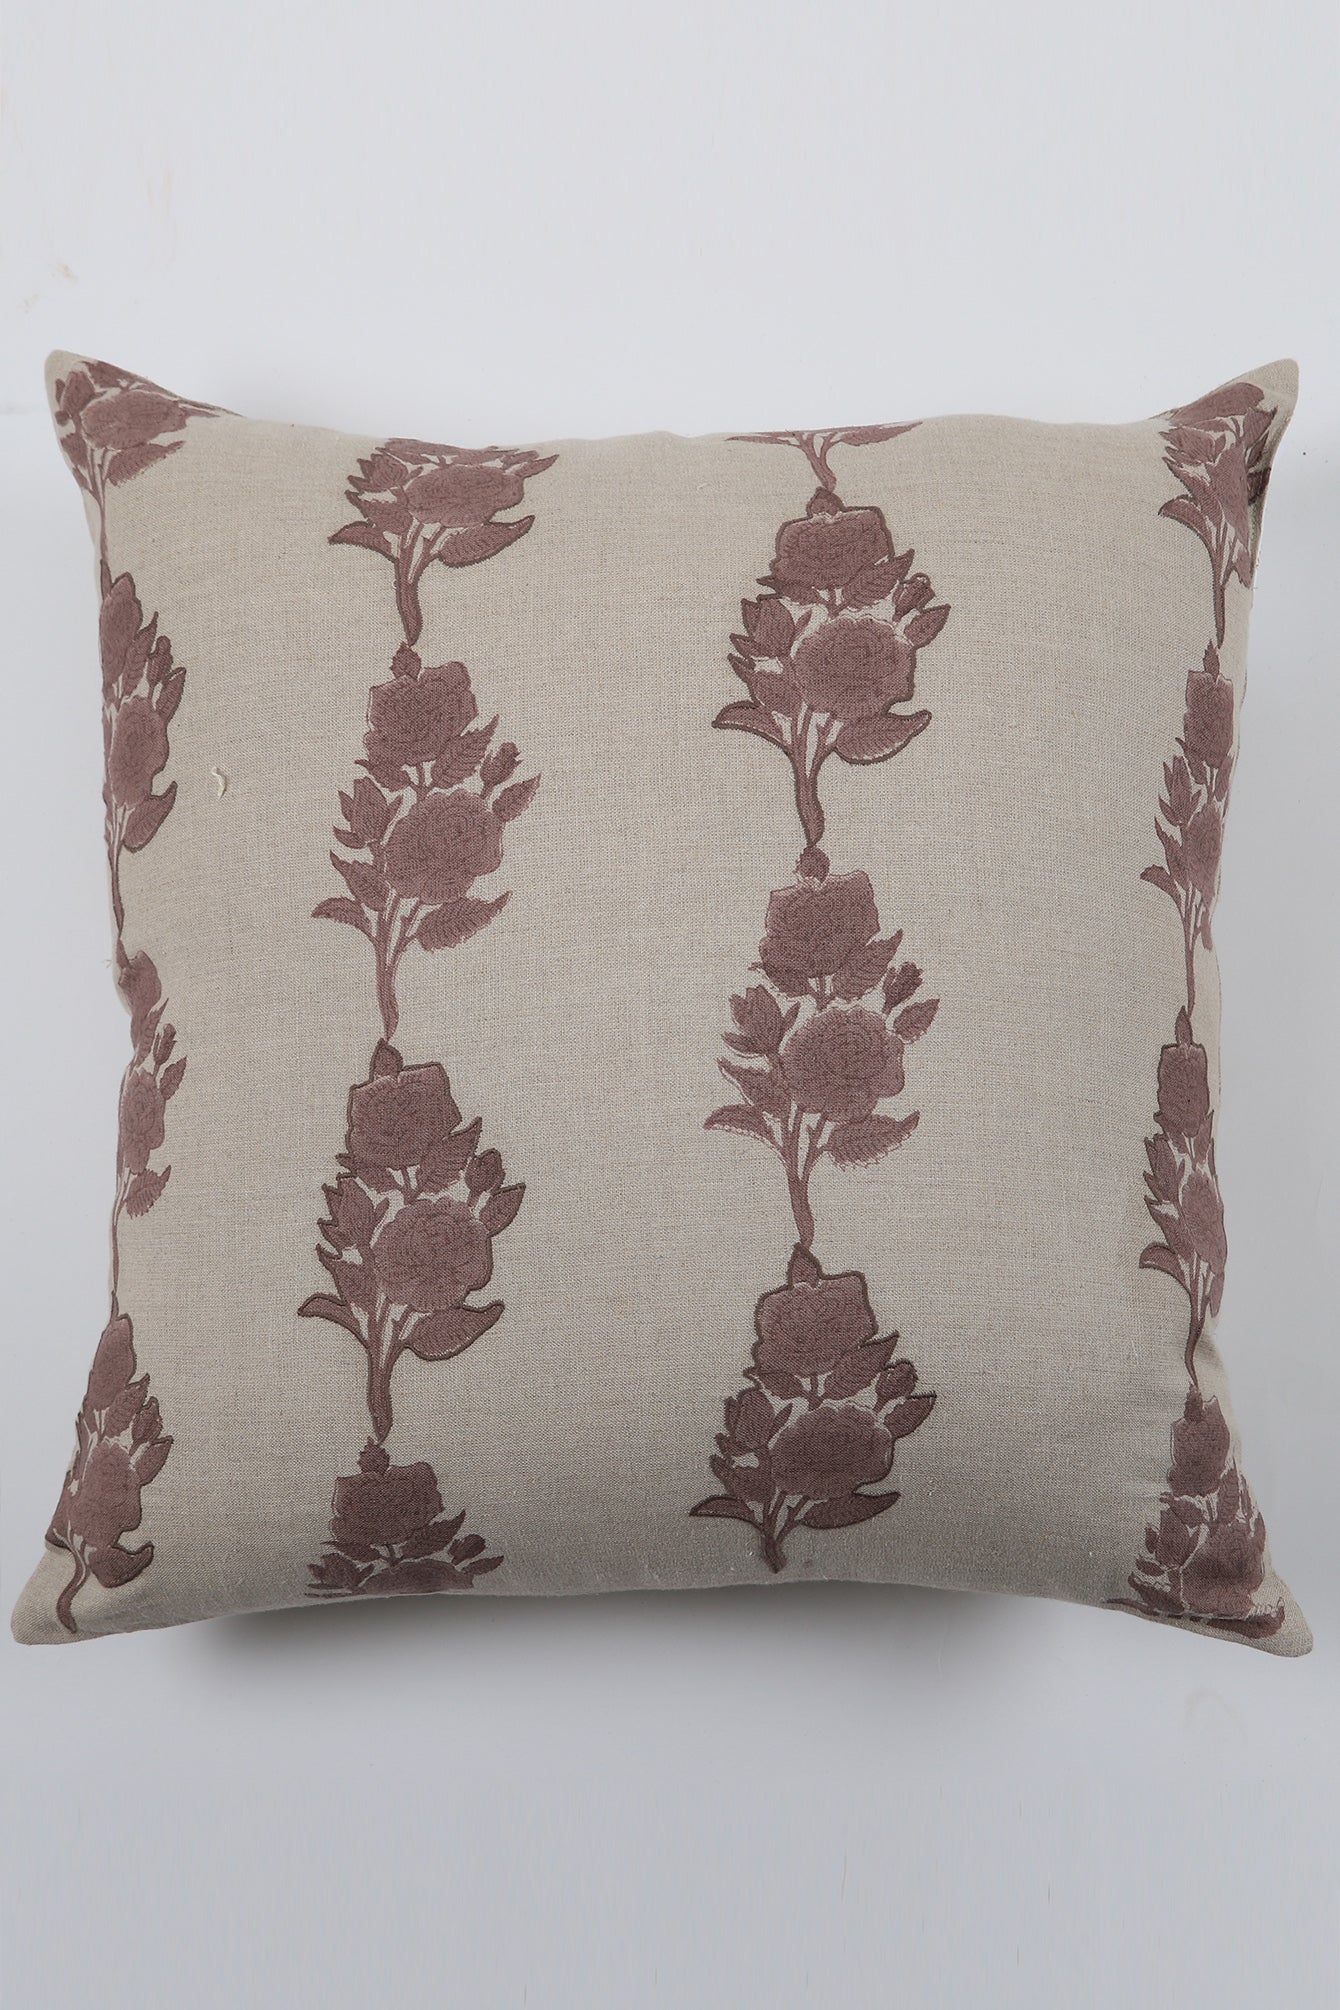 Vester Block Printed Cushion Cover